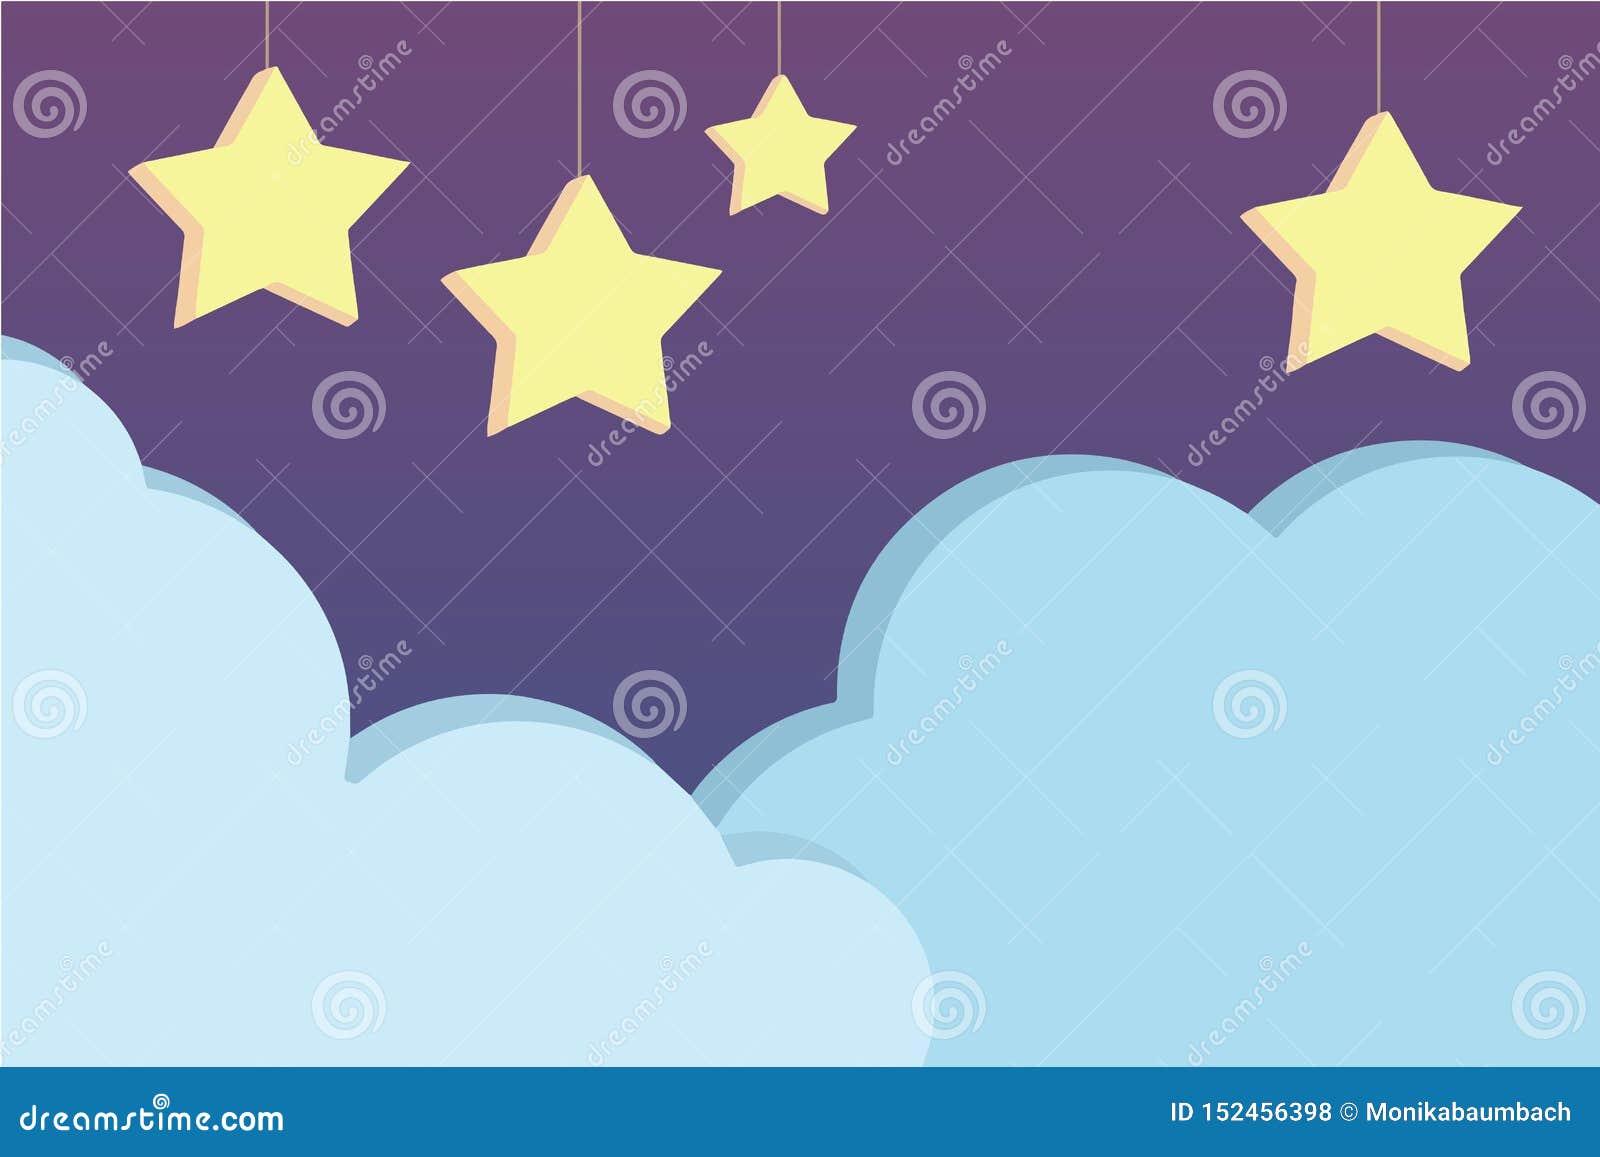 Night Sky Scene with Cute Purple Cartoon Style Vector Background with  Hanging Three Dimensional Stars and Light Blue Clouds, Illus Stock Vector -  Illustration of background, cute: 152456398